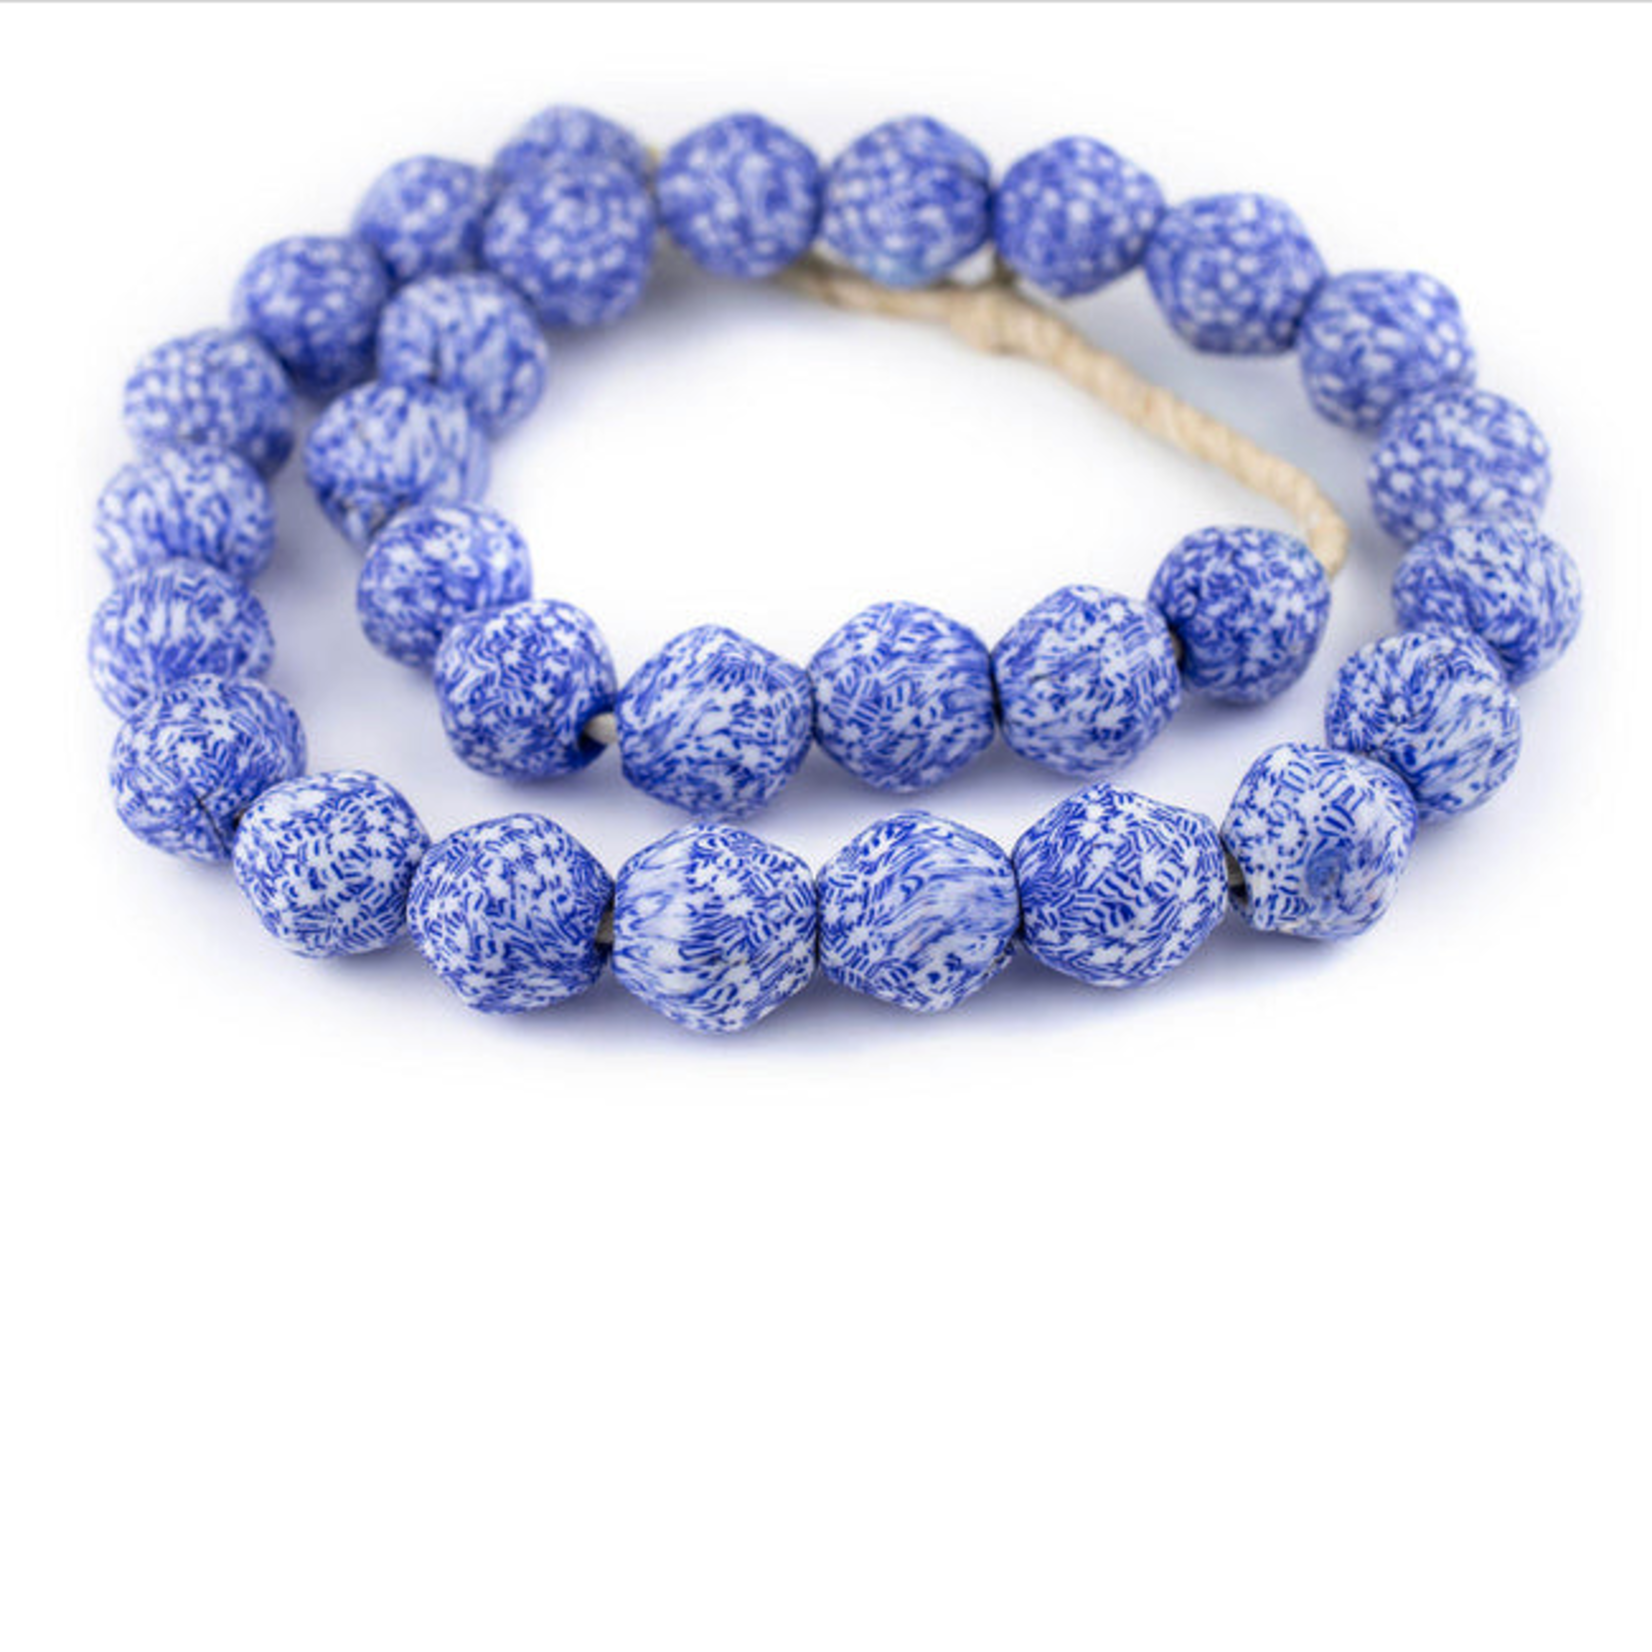 Outside The Box 34" Blue & White Fused Bicone Recycled 24mm Glass Beads